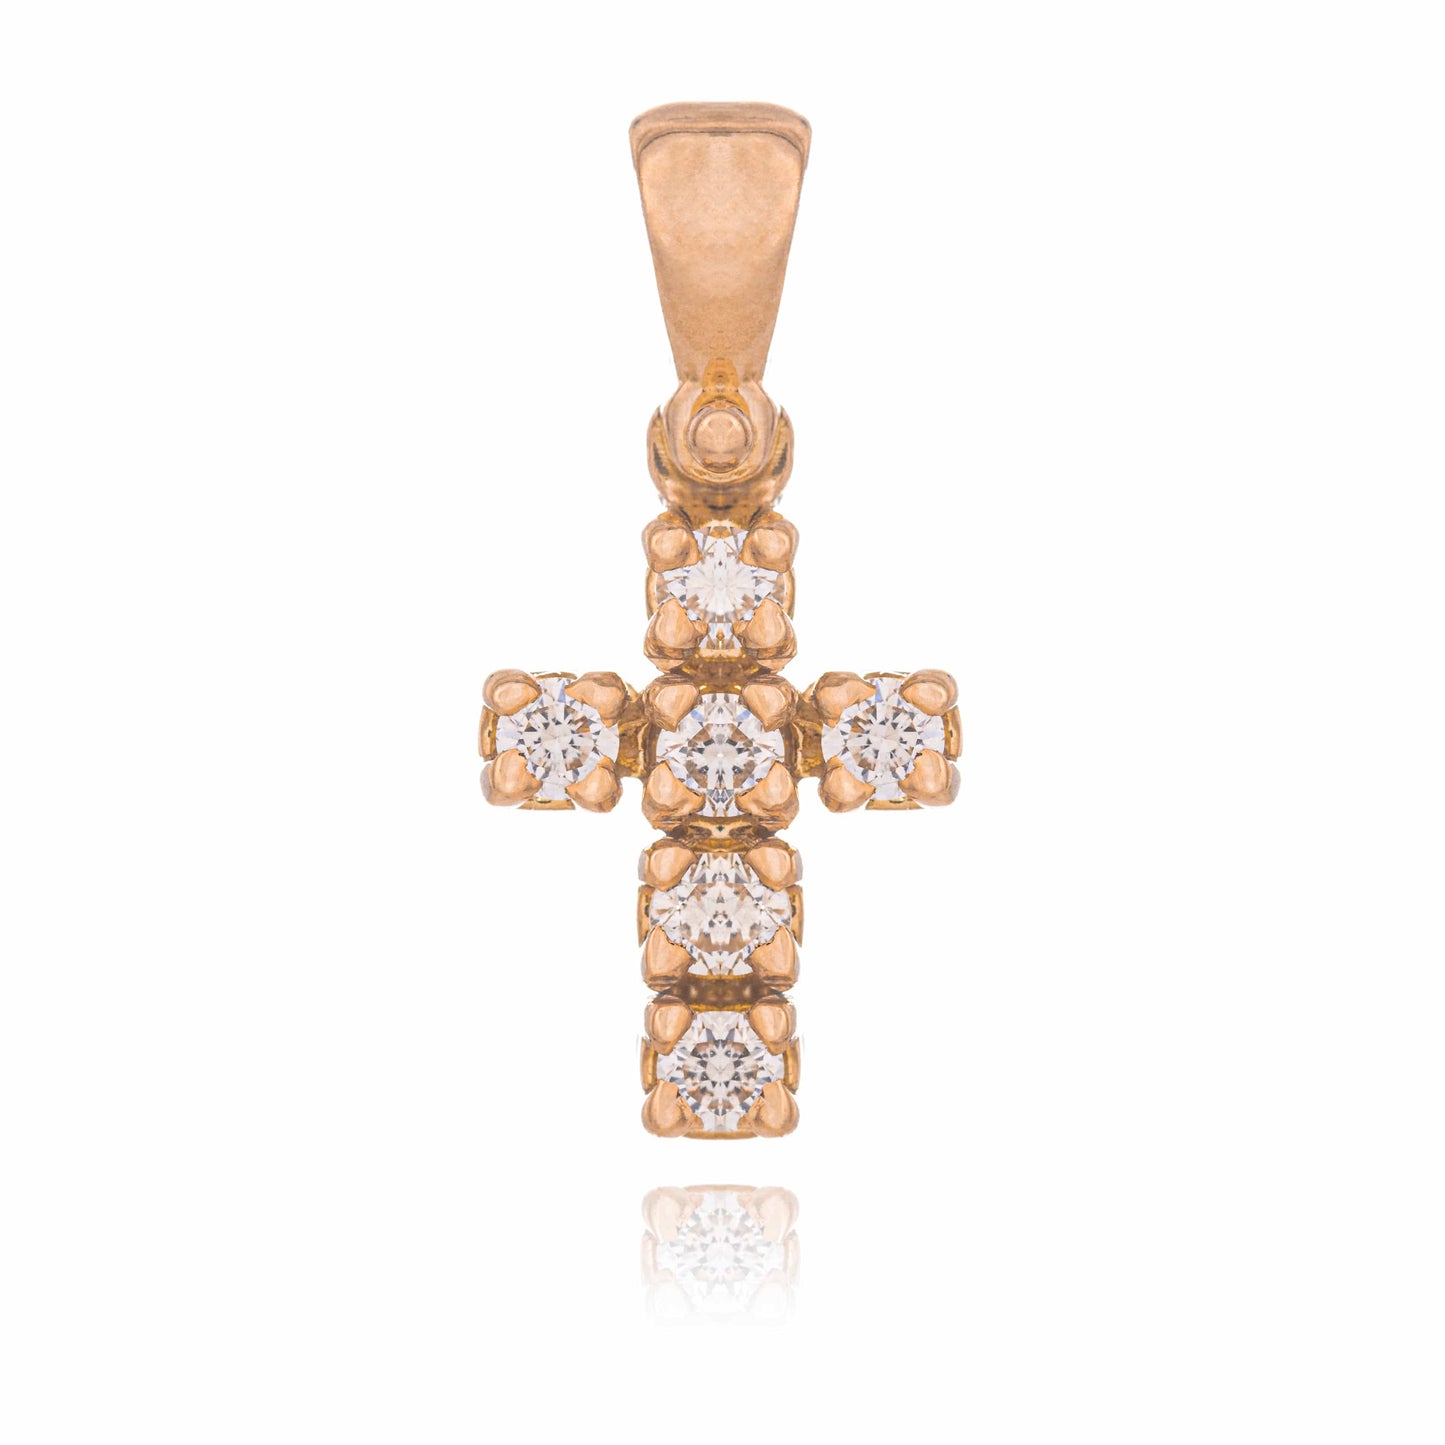 MONDO CATTOLICO Jewelry Cm 0.8 (0.31 in) / Cm 0.6 (0.23 in) Pink Gold Cross with Diamonds